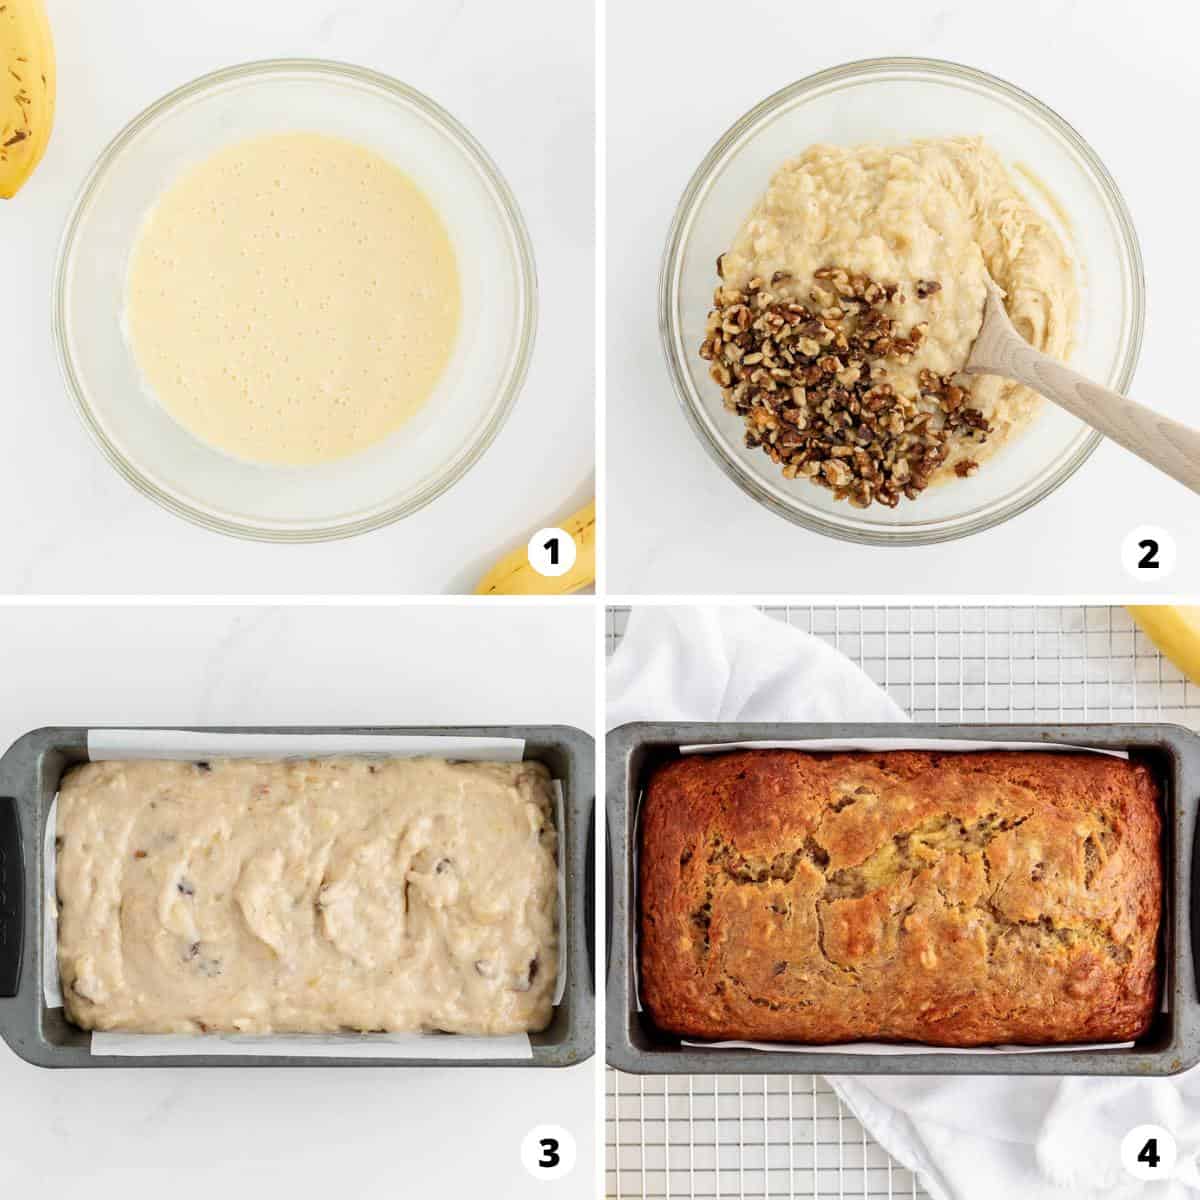 Showing how to make banana nut bread in a 4 step collage.